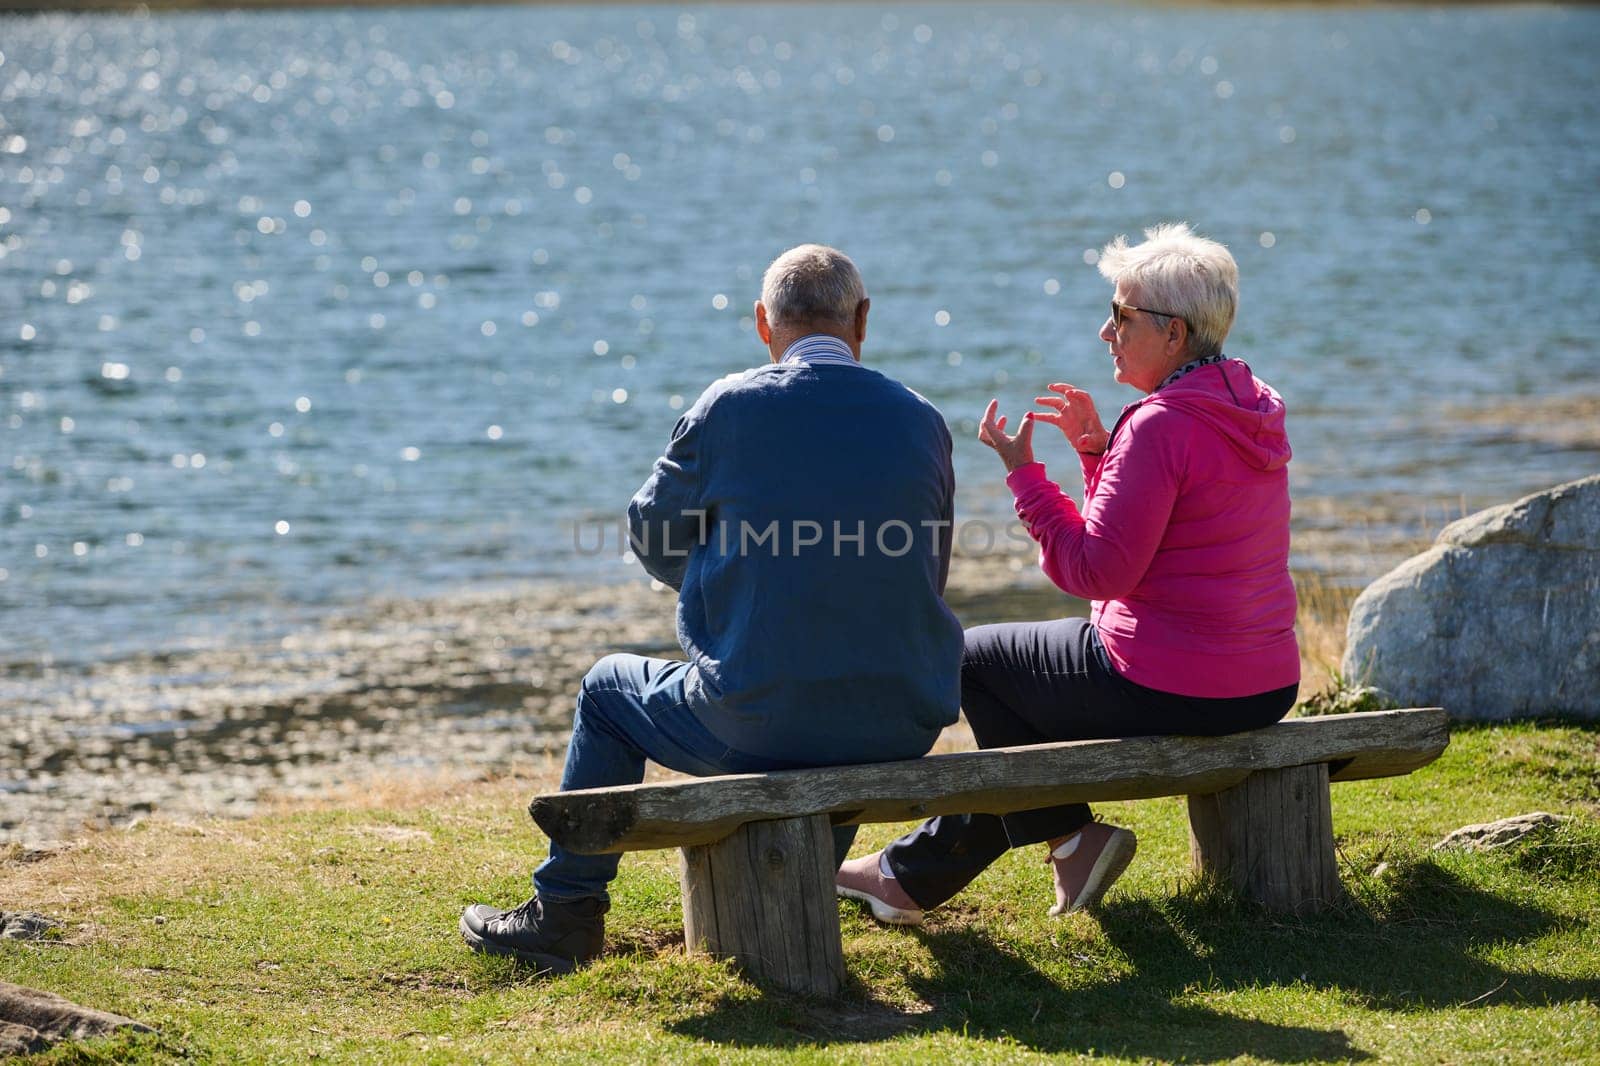 Elderly couple finding solace and joy as they rest on a park bench, engaged in heartfelt conversation, following a rejuvenating strol a testament to the enduring companionship and serene connection that accompanies the golden years.